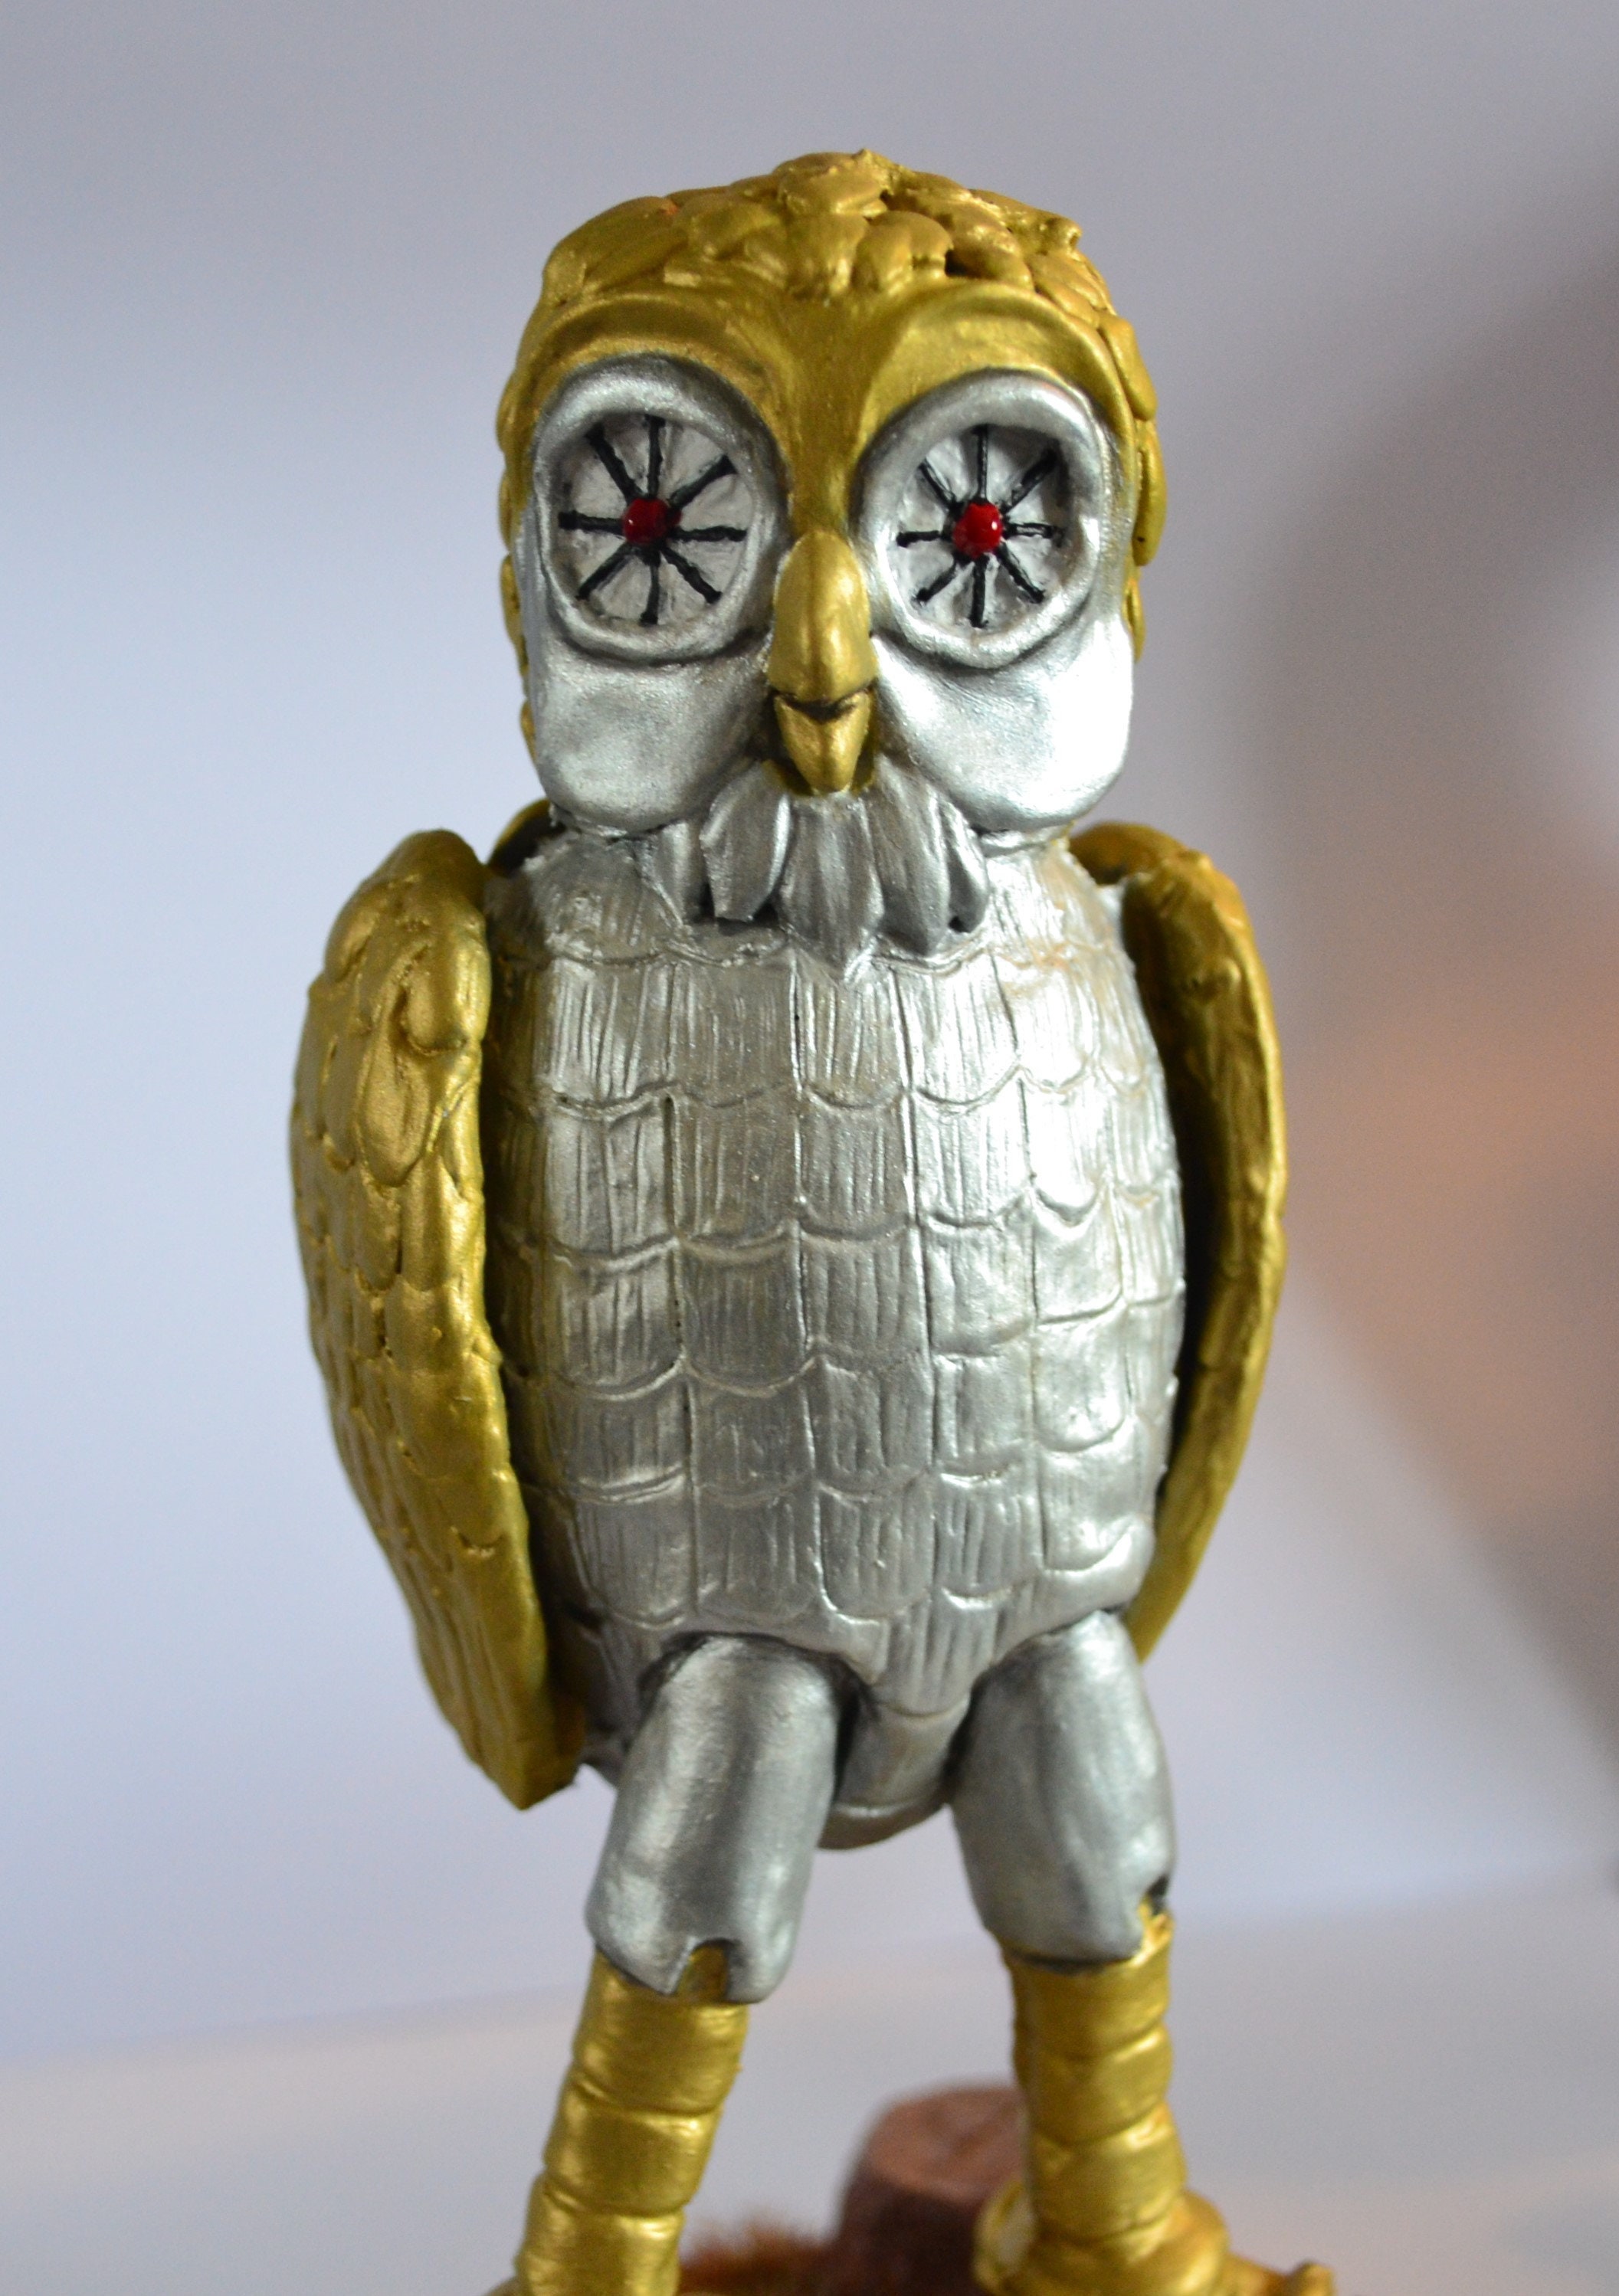 The Mechanical Owl Bubo Clash of the Titans Inspired -  Israel